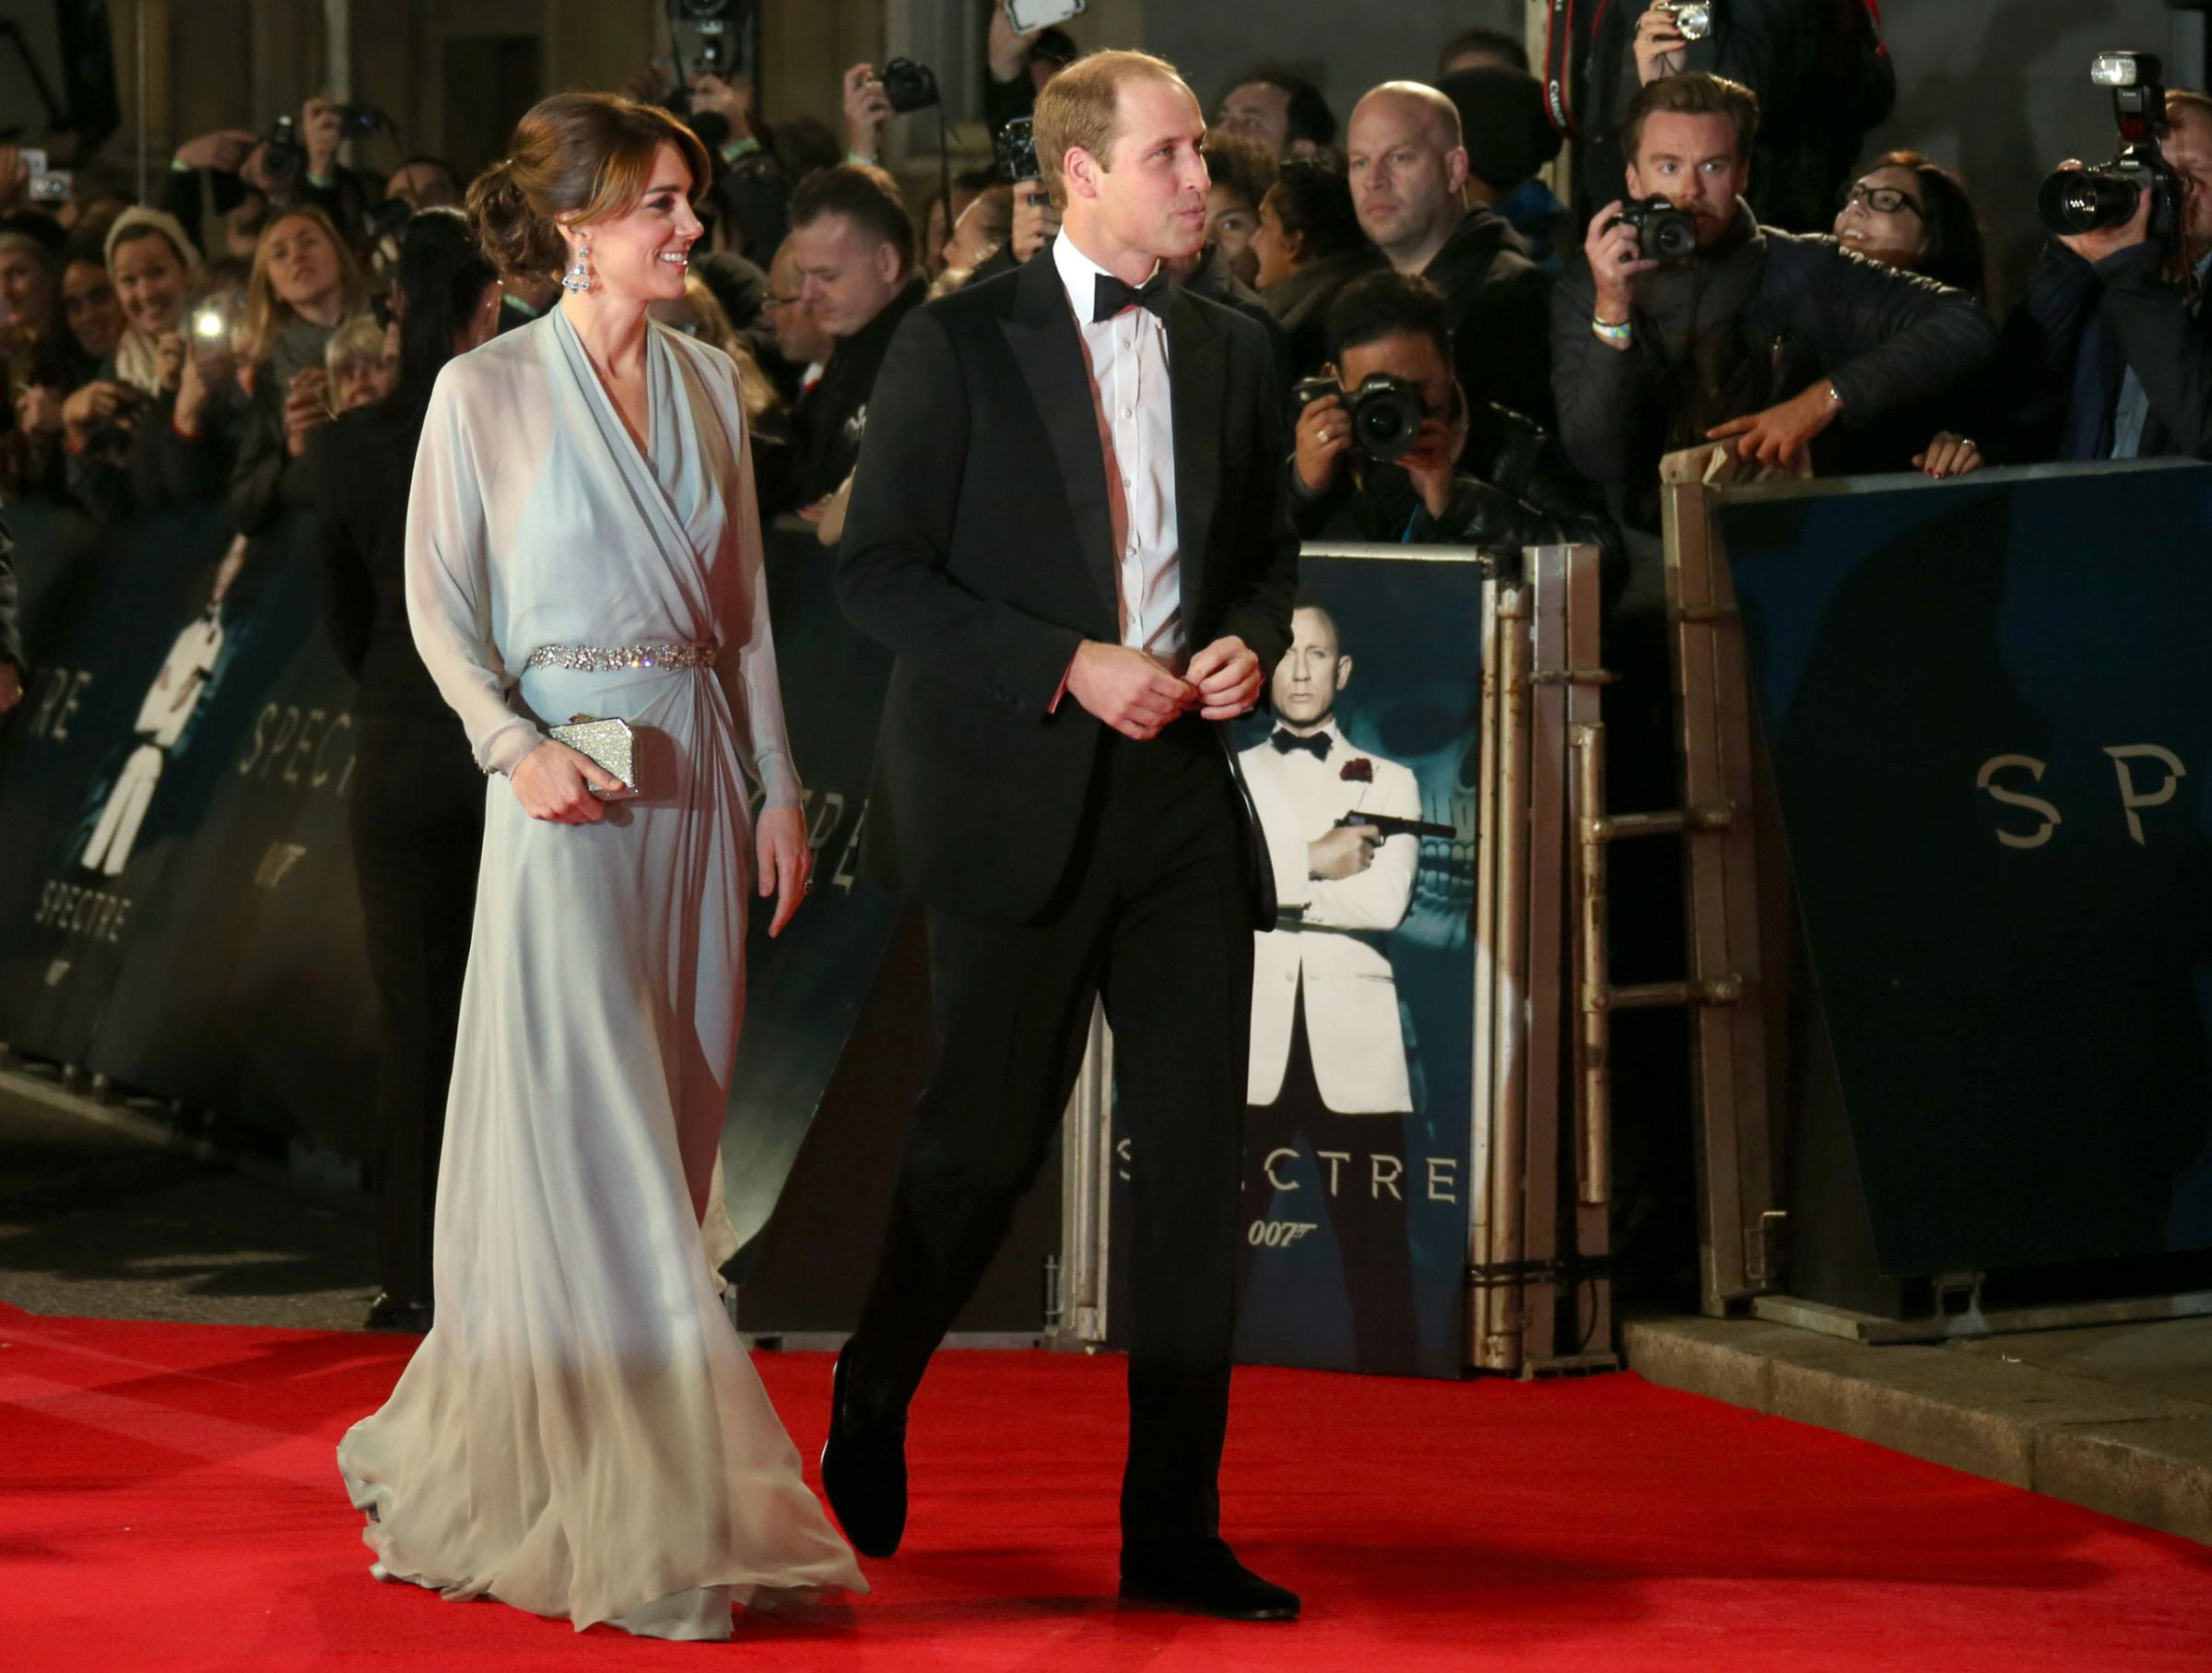 The Duchess of Cambridge, left, and the Duke of Cambridge arrive for the World Premiere of "Spectre" at the Royal Albert Hall in central London, on Monday, Oct. 26, 2015. (Photo by Joel Ryan/Invision/AP)